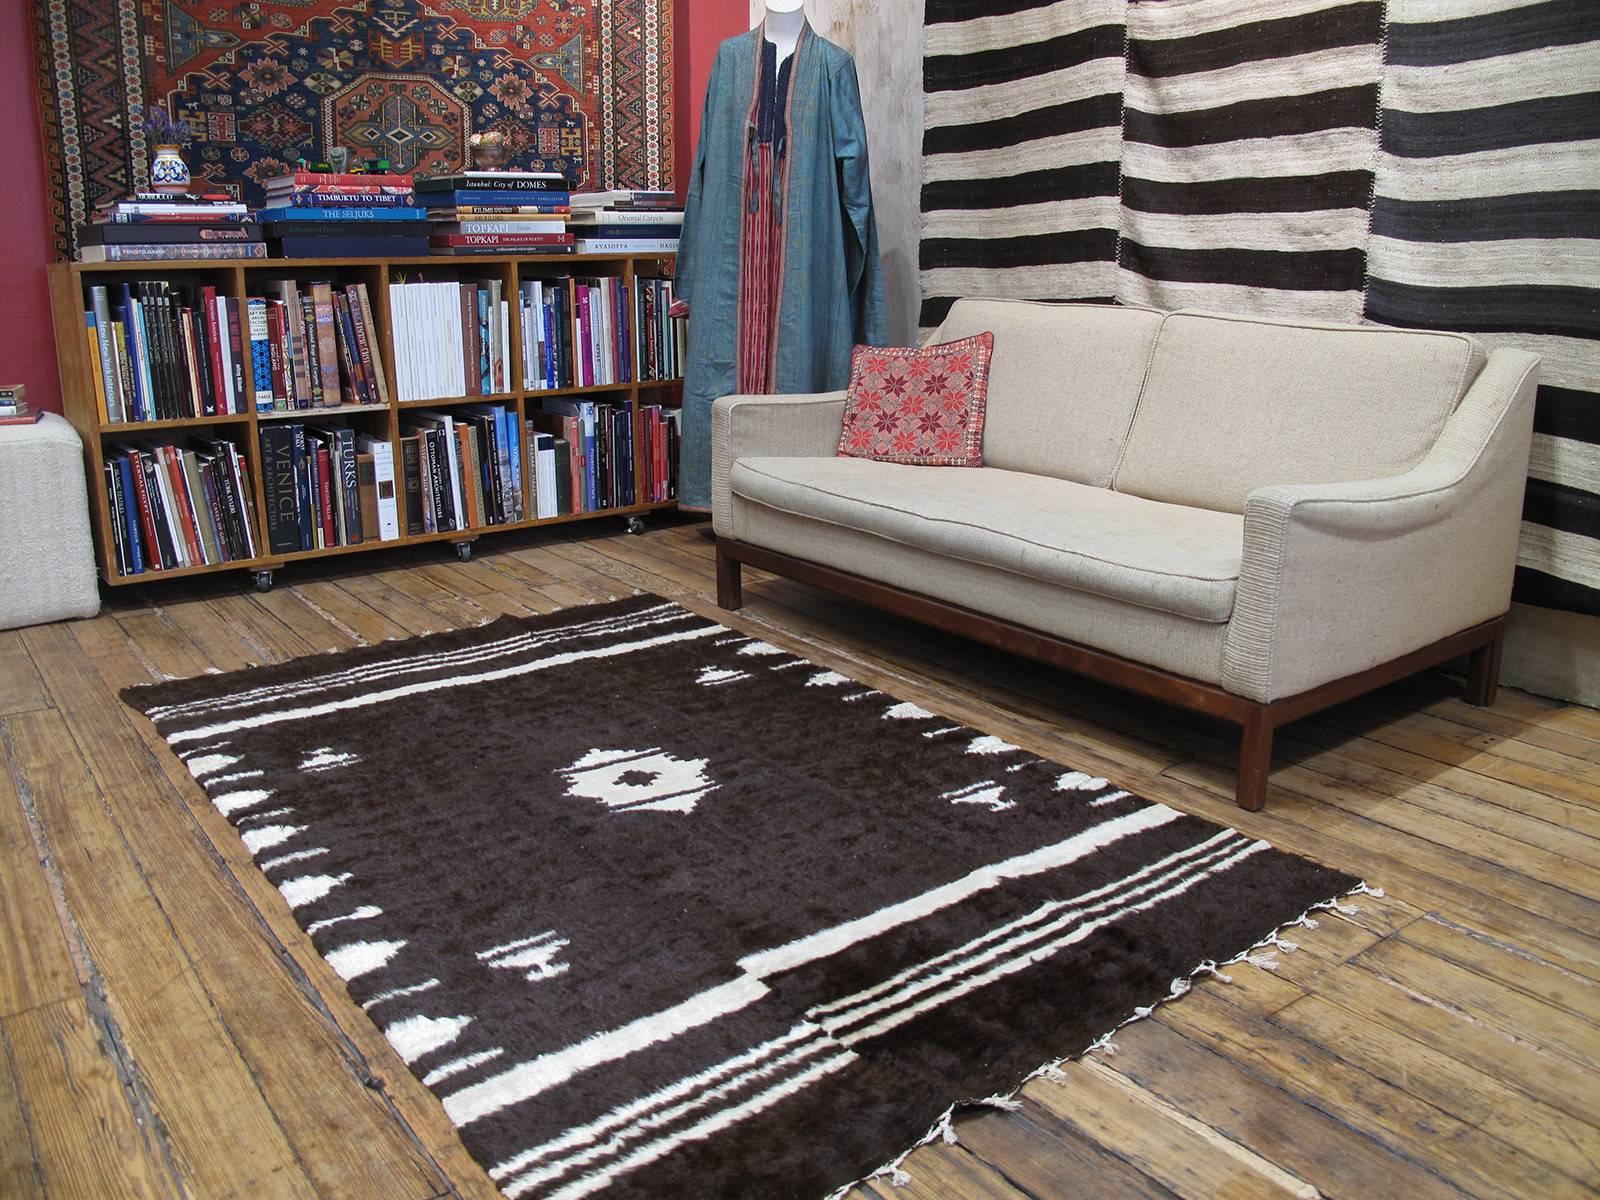 Angora blanket rug. An old blanket from Eastern Turkey, woven with the fine, soft hair of the indigenous angora goat, better known as mohair. An older example, woven in three narrow panels. Can be used as a rug on the floor in low traffic, but